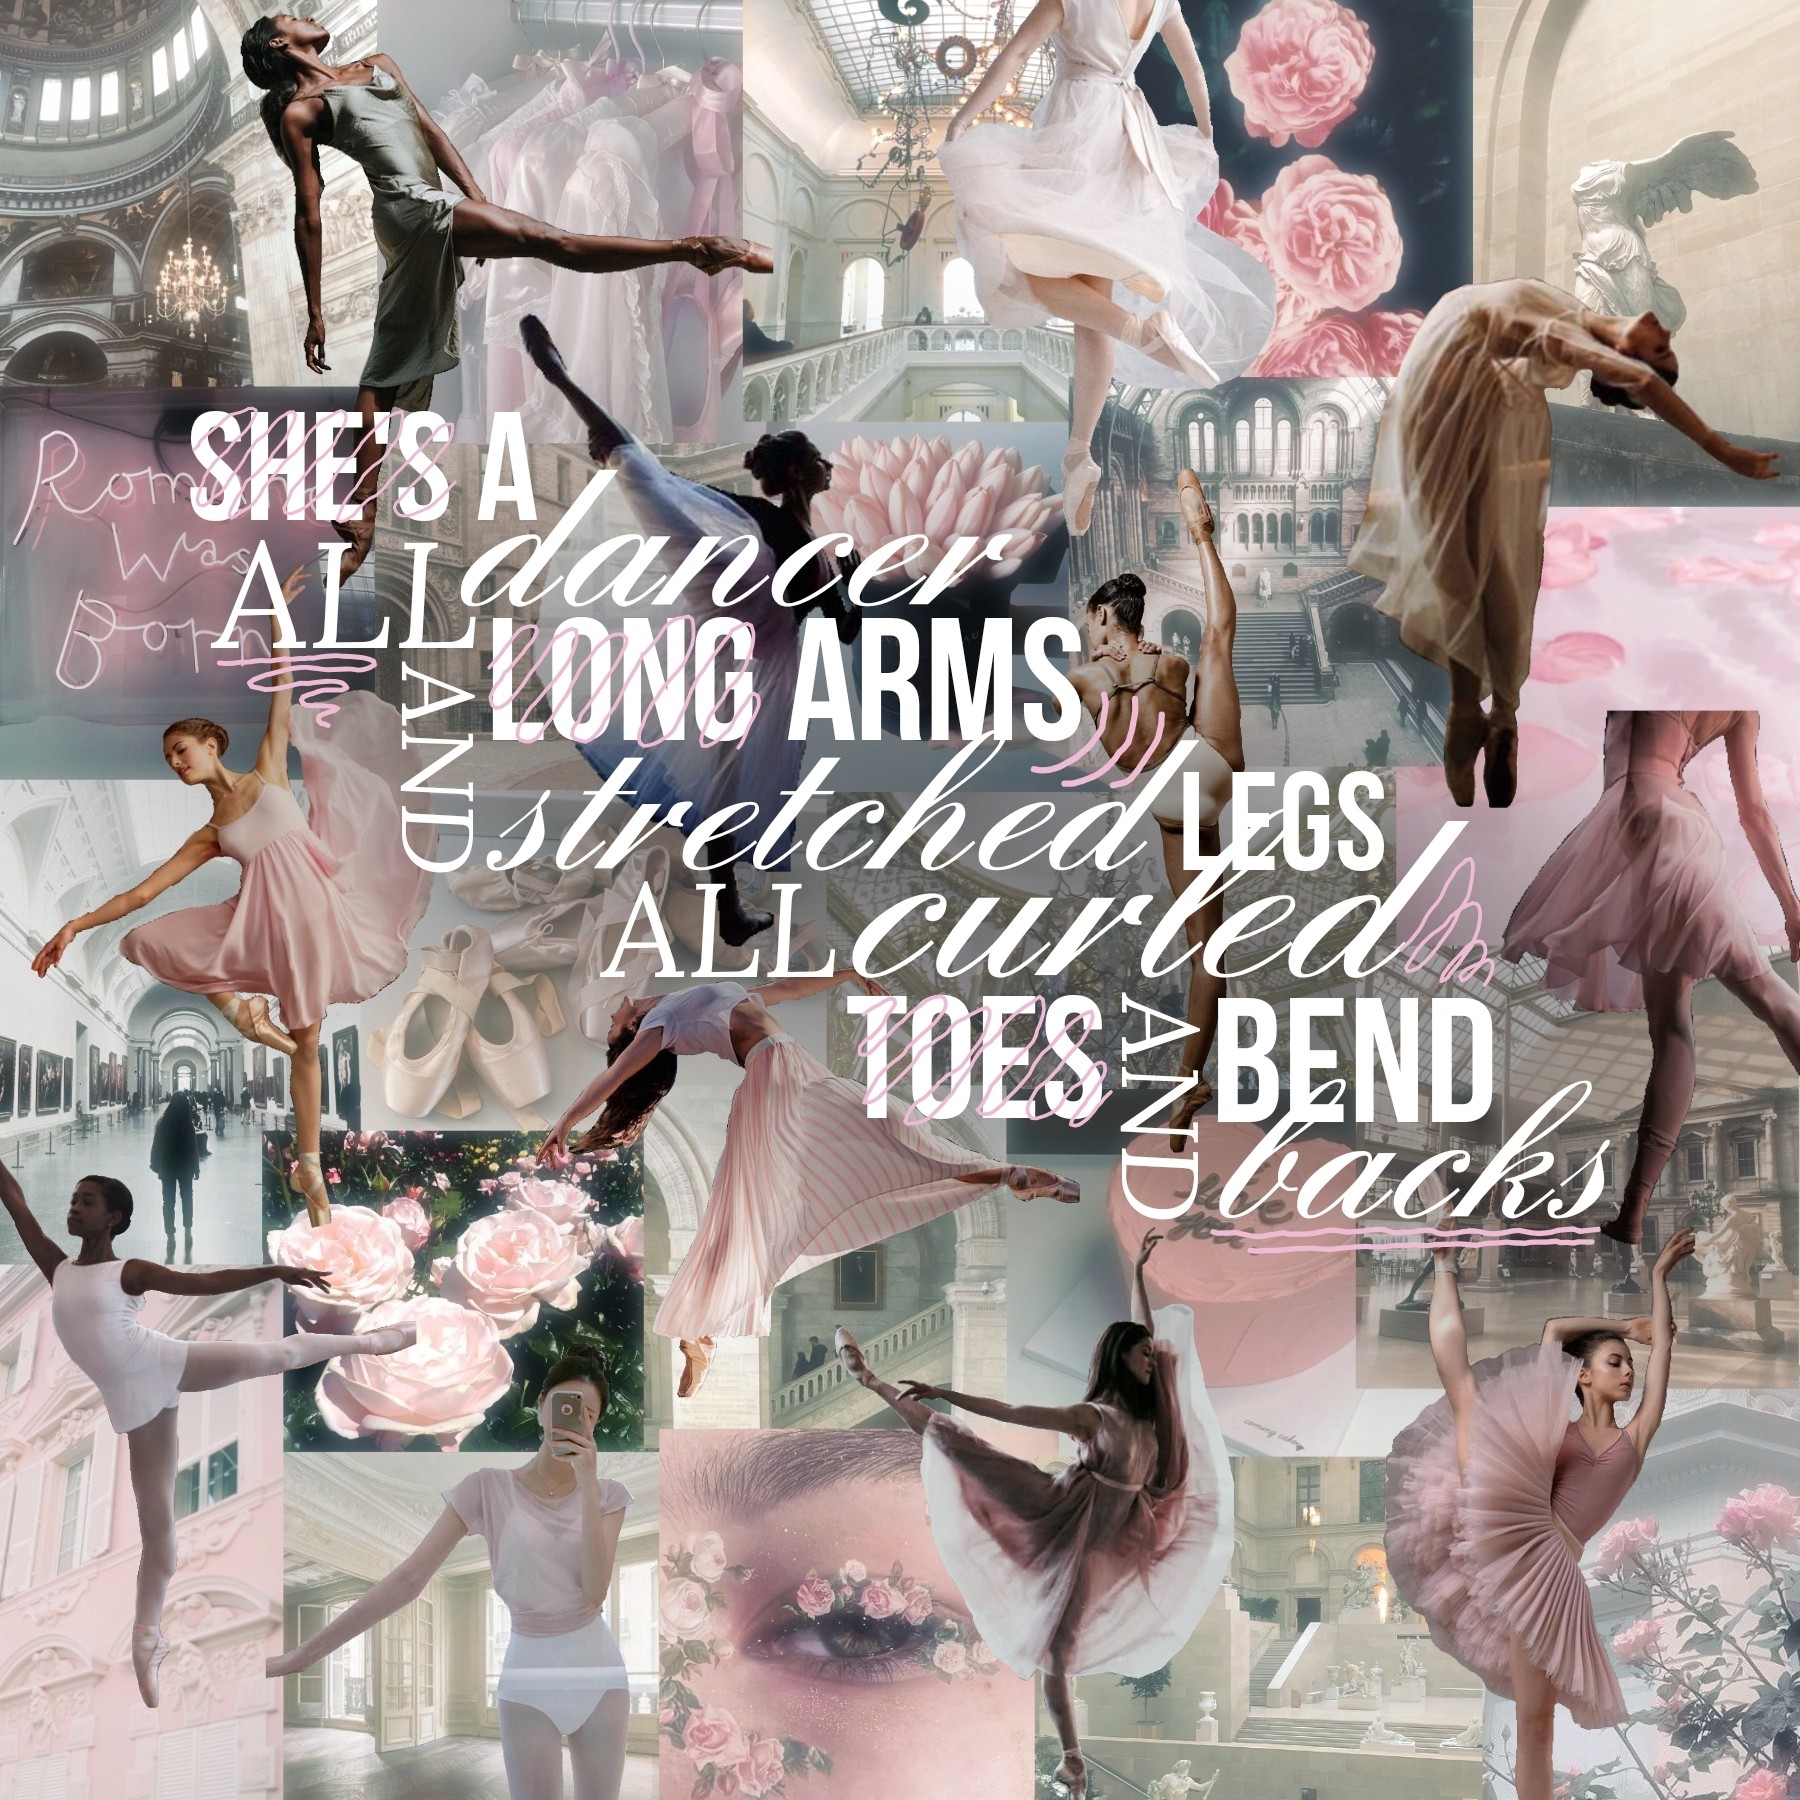 I always forget how demotivating pc is just after summer break. Anyway have this throwback text style and loads of ballerinas I spend so much time on cutting out :)